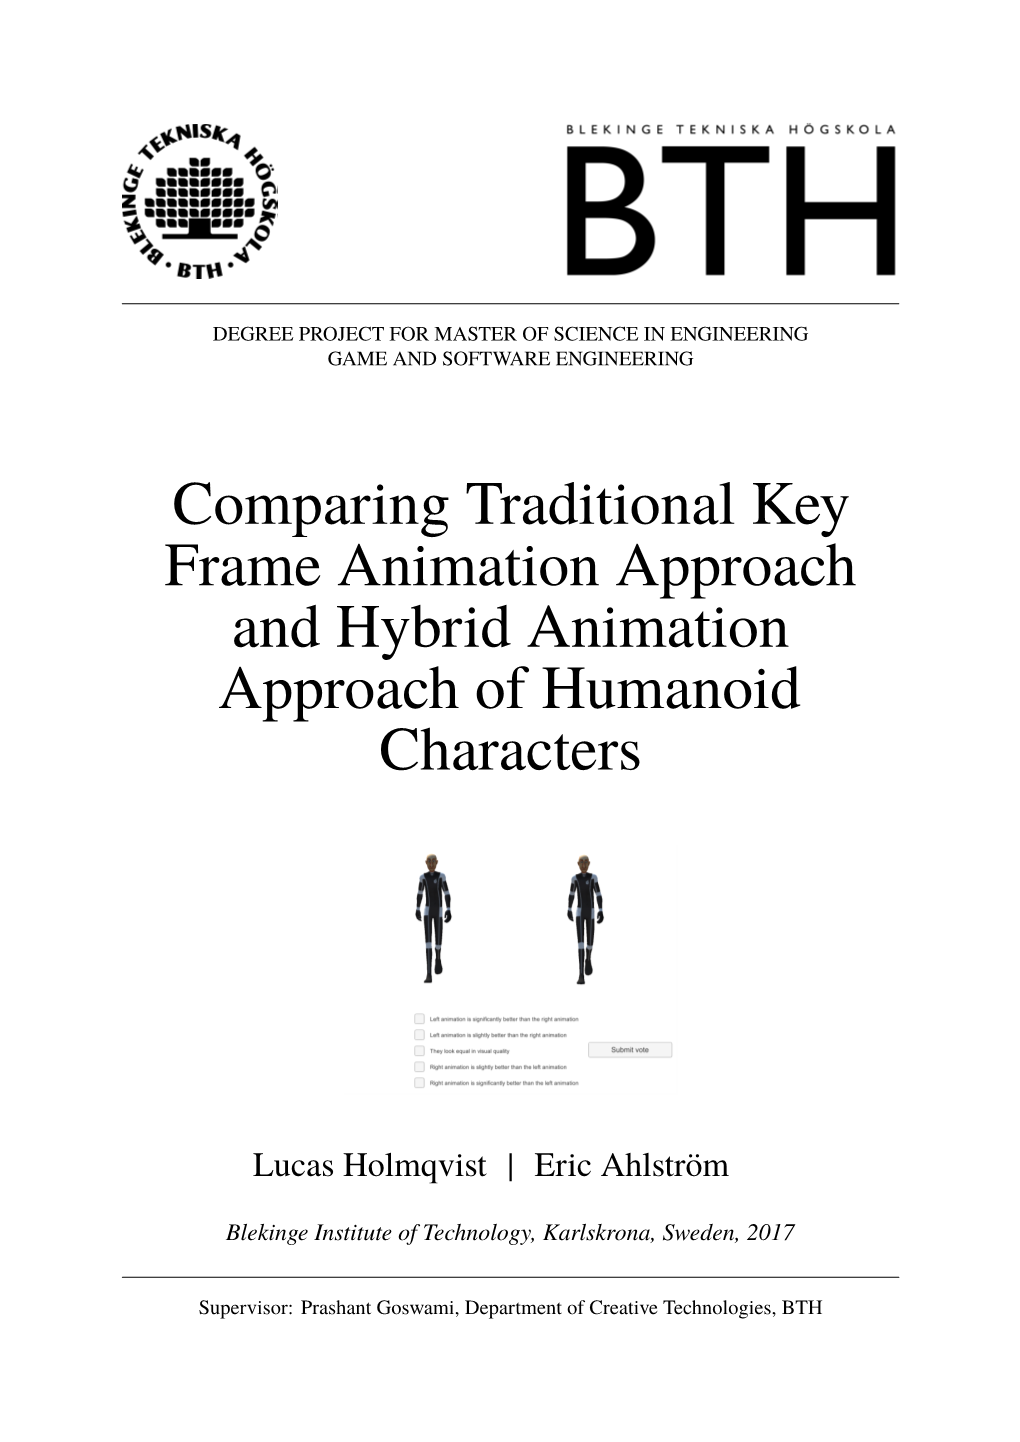 Comparing Traditional Key Frame Animation Approach and Hybrid Animation Approach of Humanoid Characters